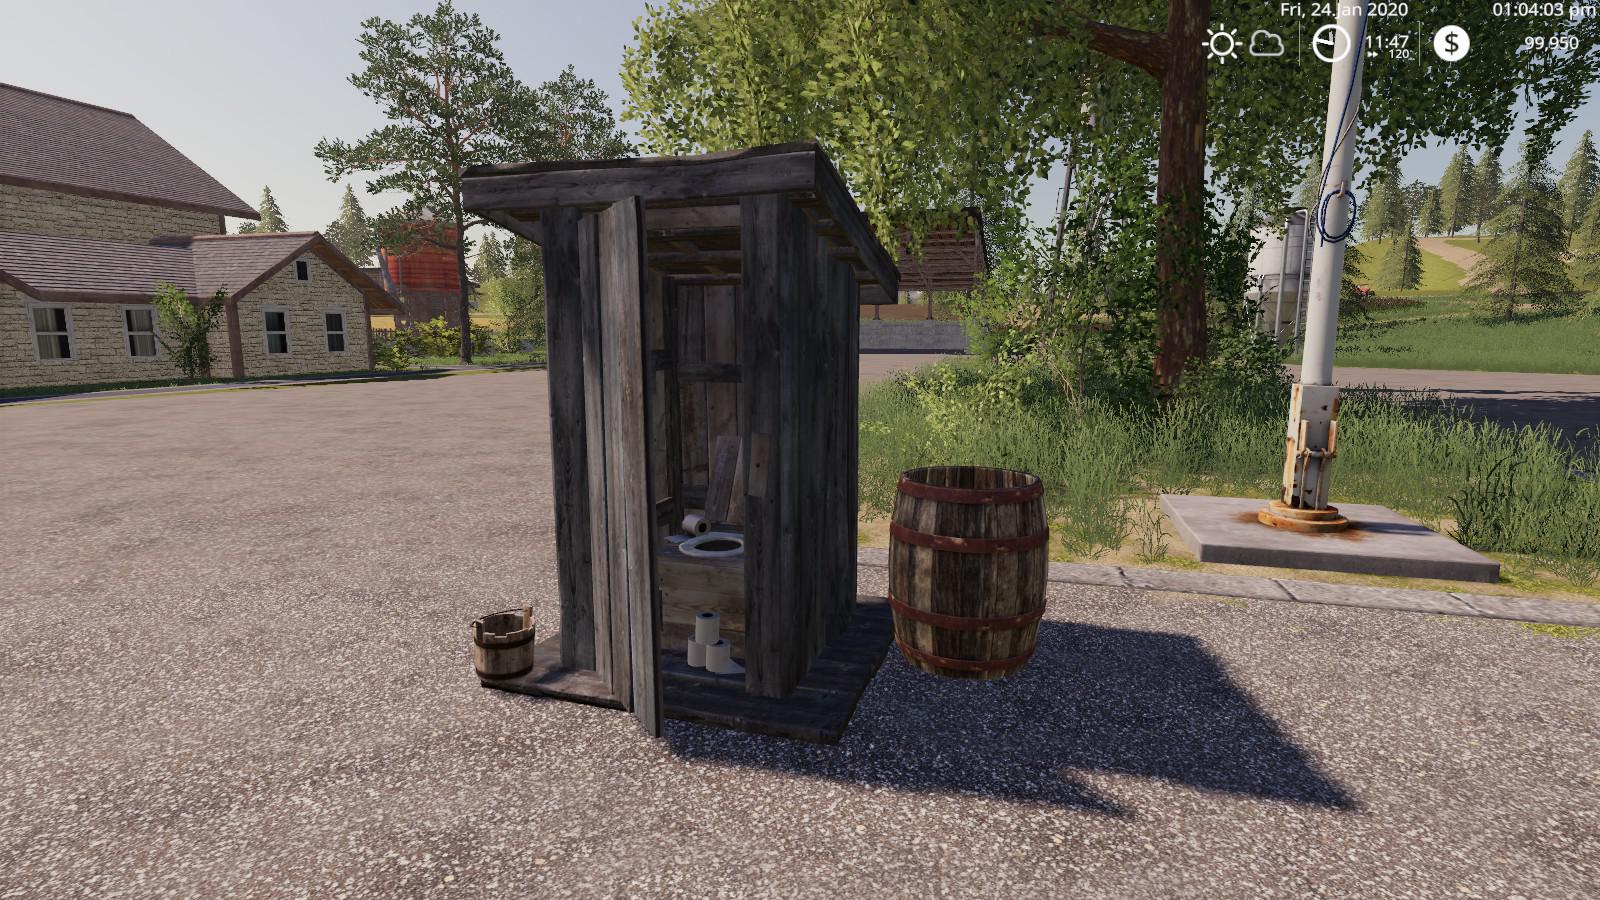 OUTHOUSE WITH SLEEP TRIGGER V1.0